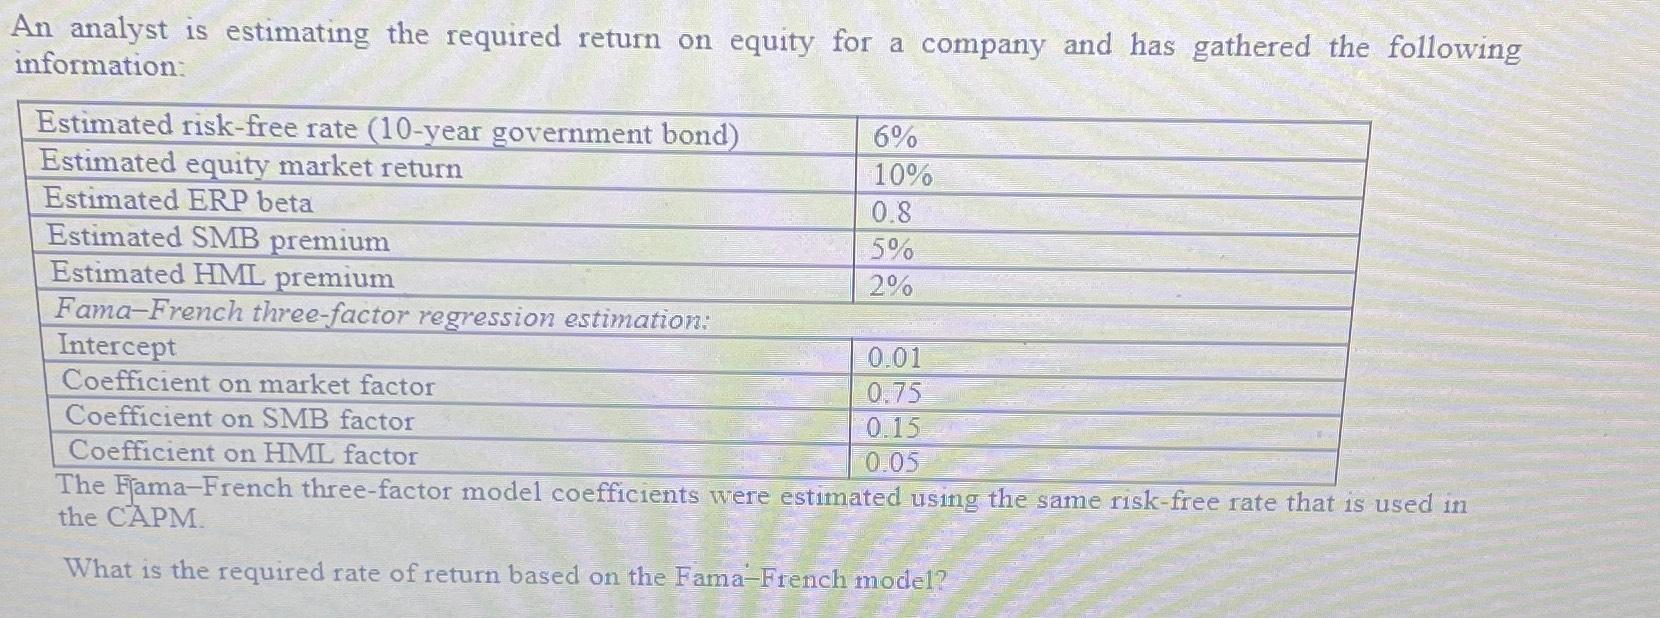 An analyst is estimating the required return on equity for a company and has gathered the following